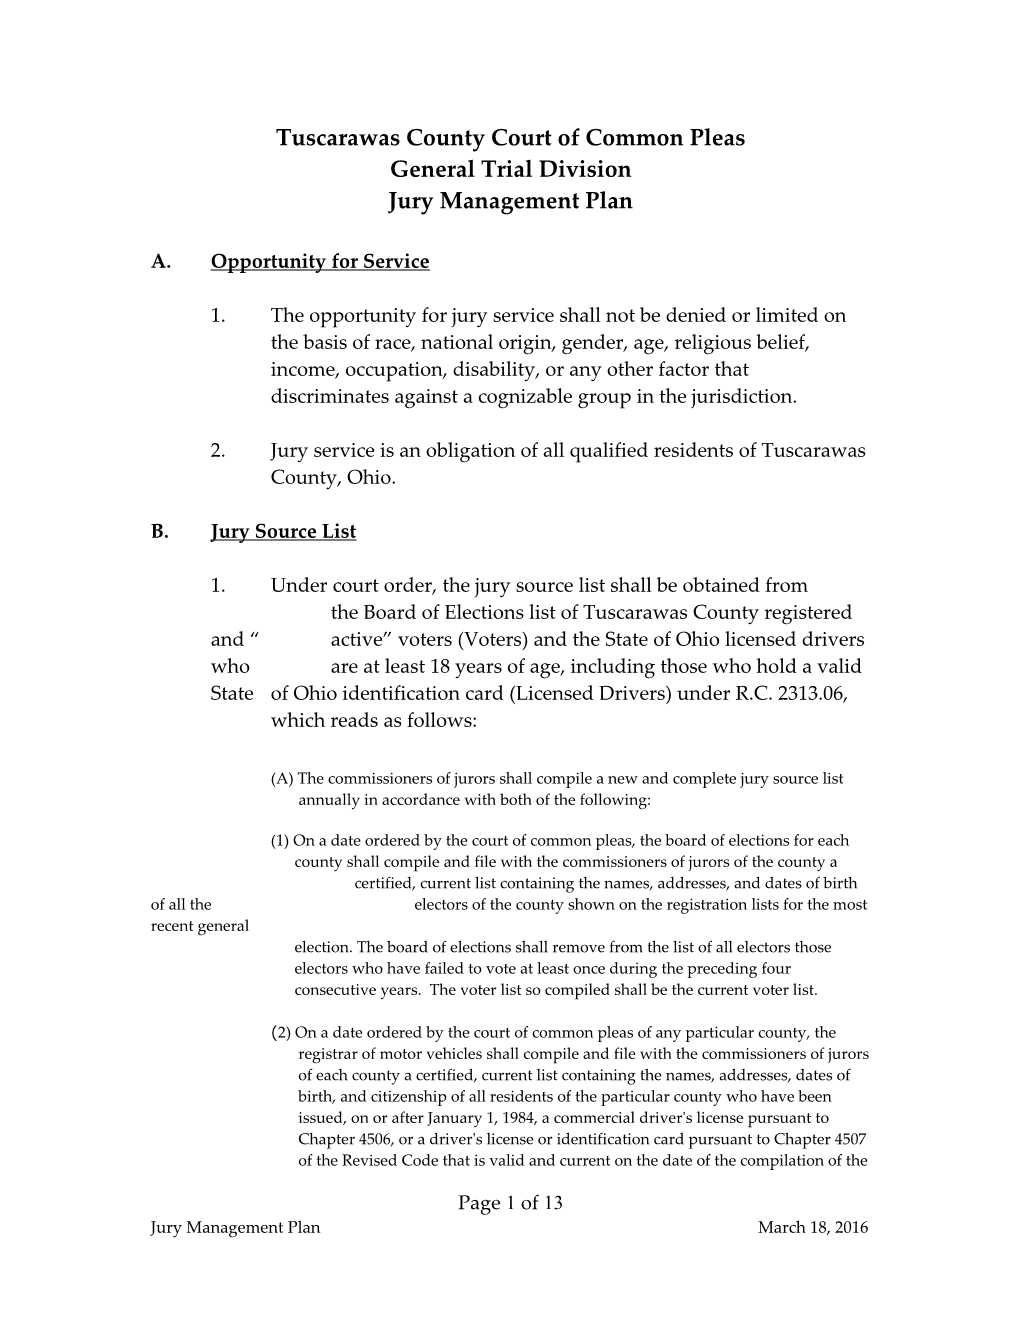 Jury Use and Management Plan